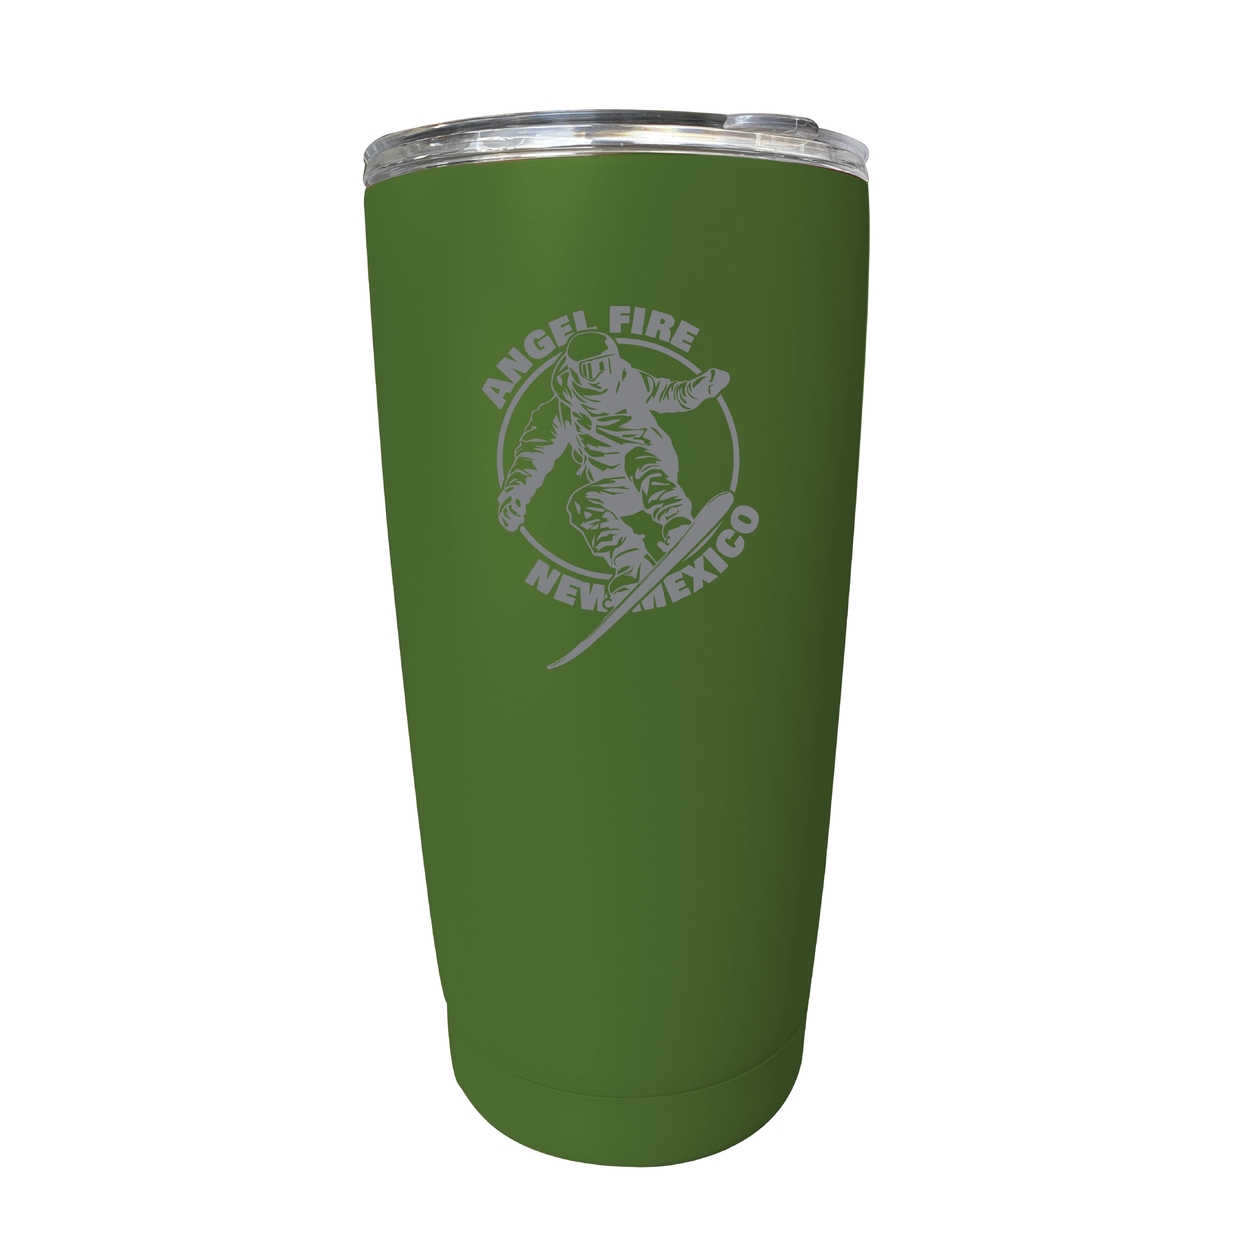 Angel Fire New Mexico Souvenir 16 Oz Engraved Stainless Steel Insulated Tumbler - Green,,Single Unit